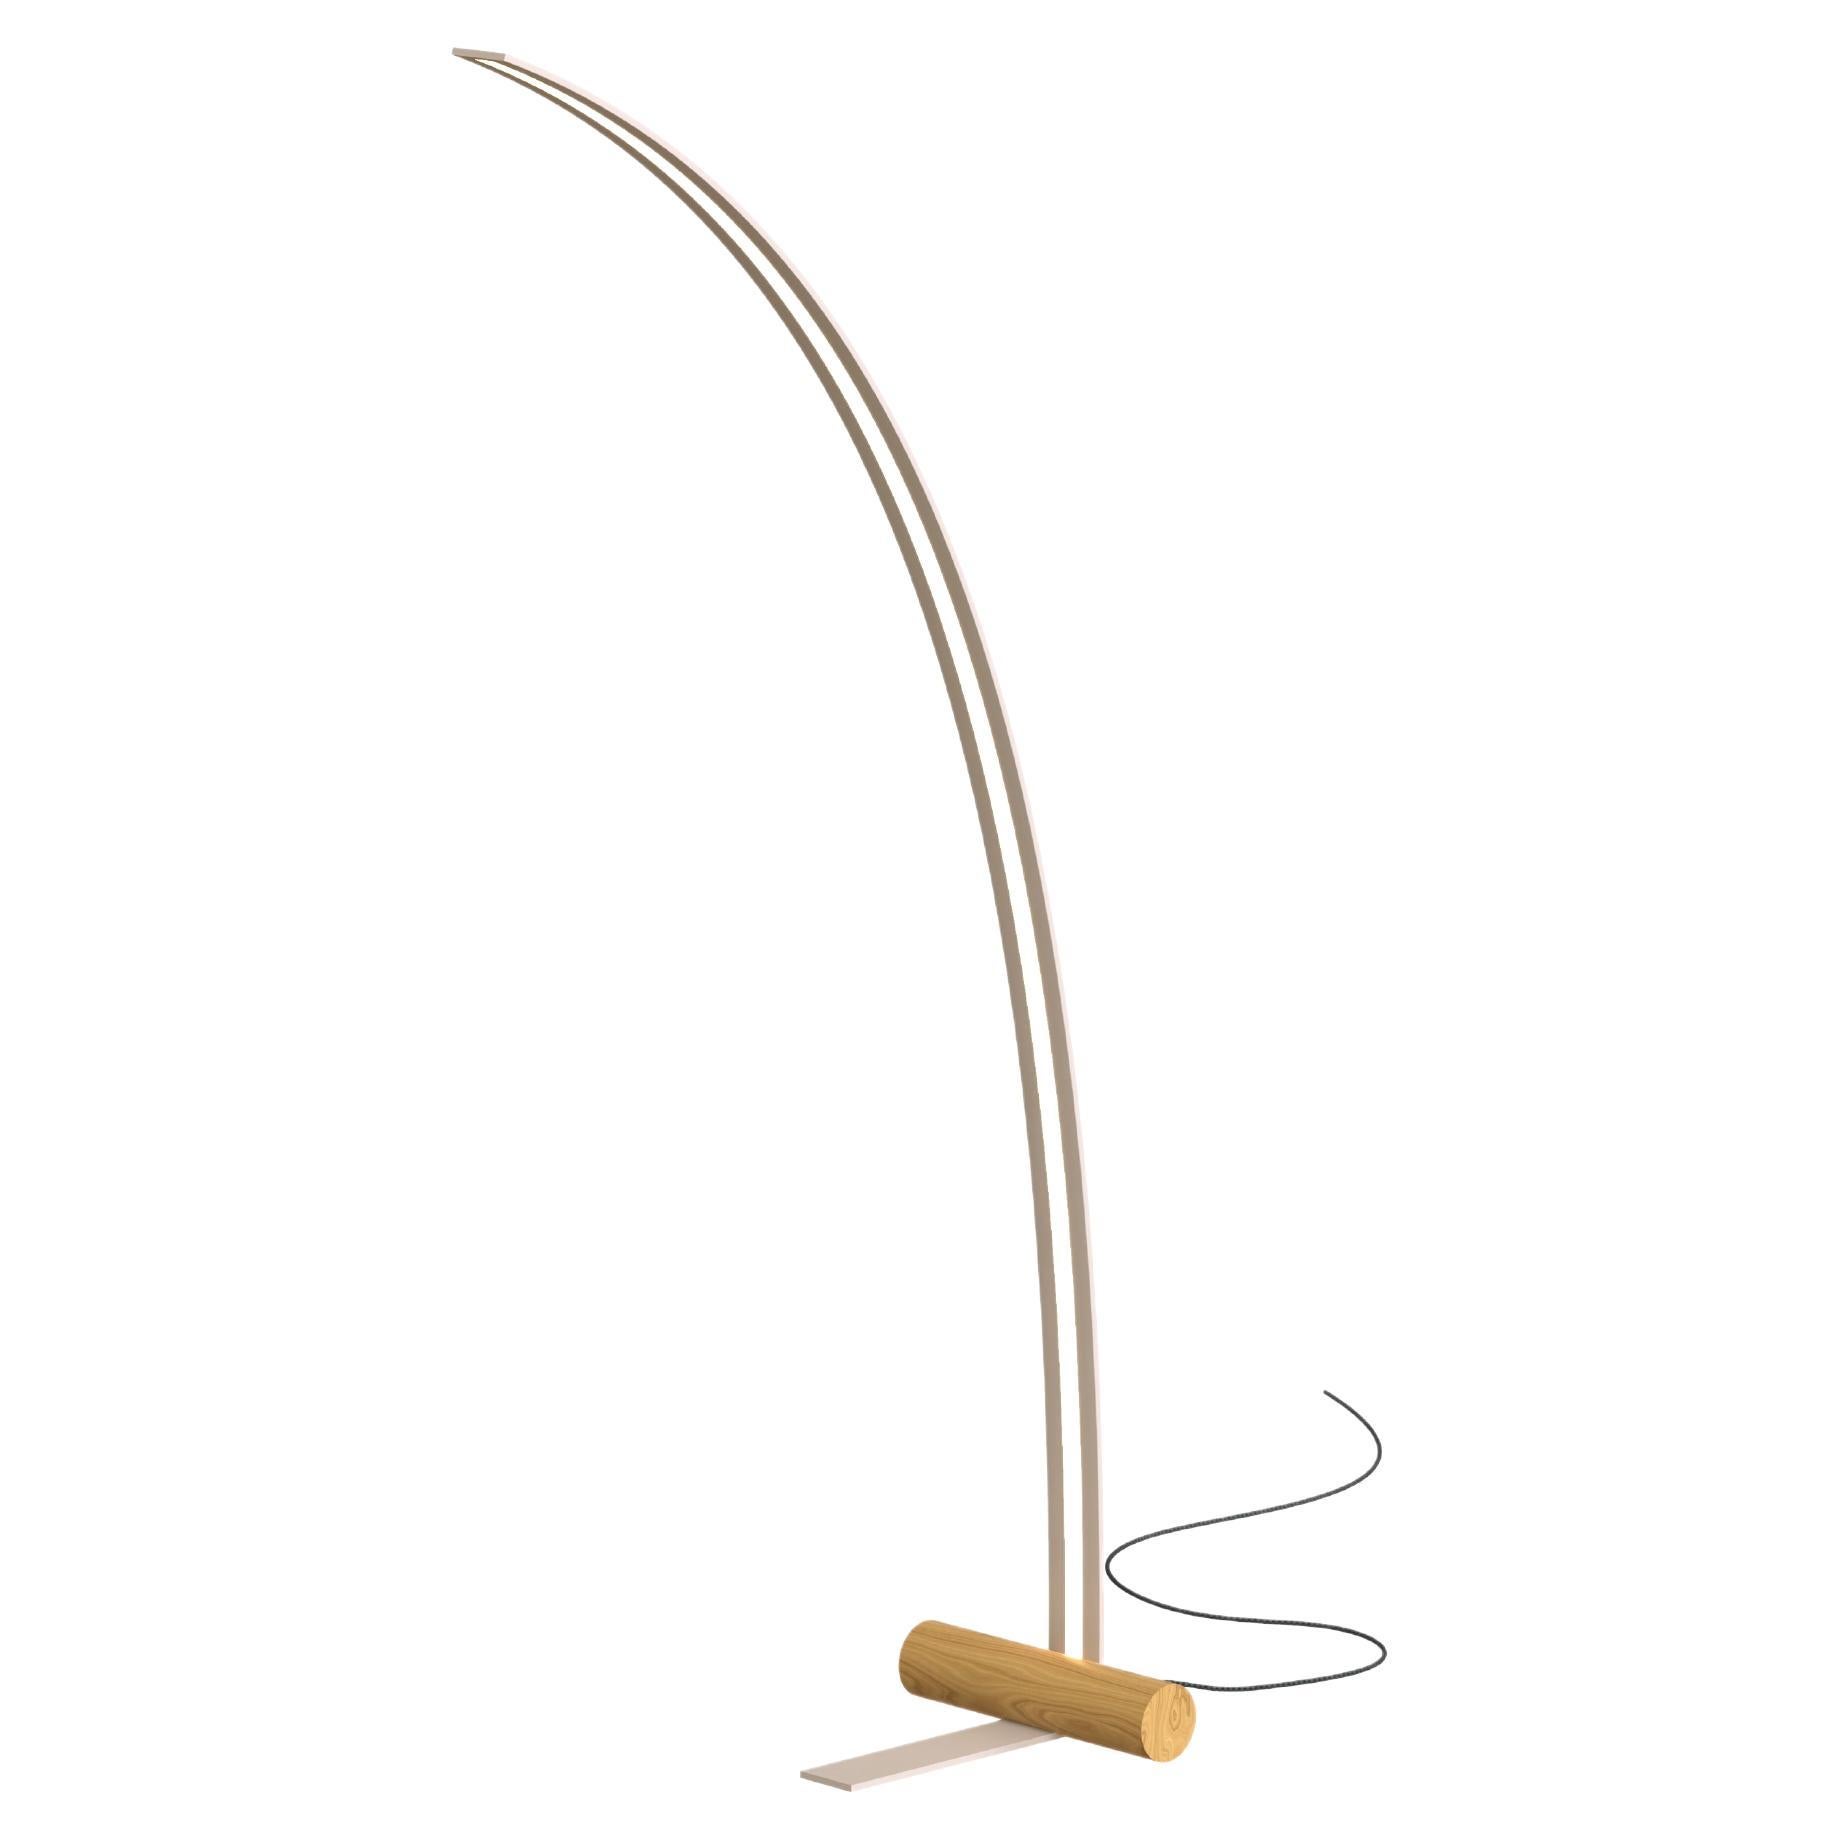 Lampadaire Modernity 'Nastro 563.63' by Studiopepe x Tooy, Beige & Ash